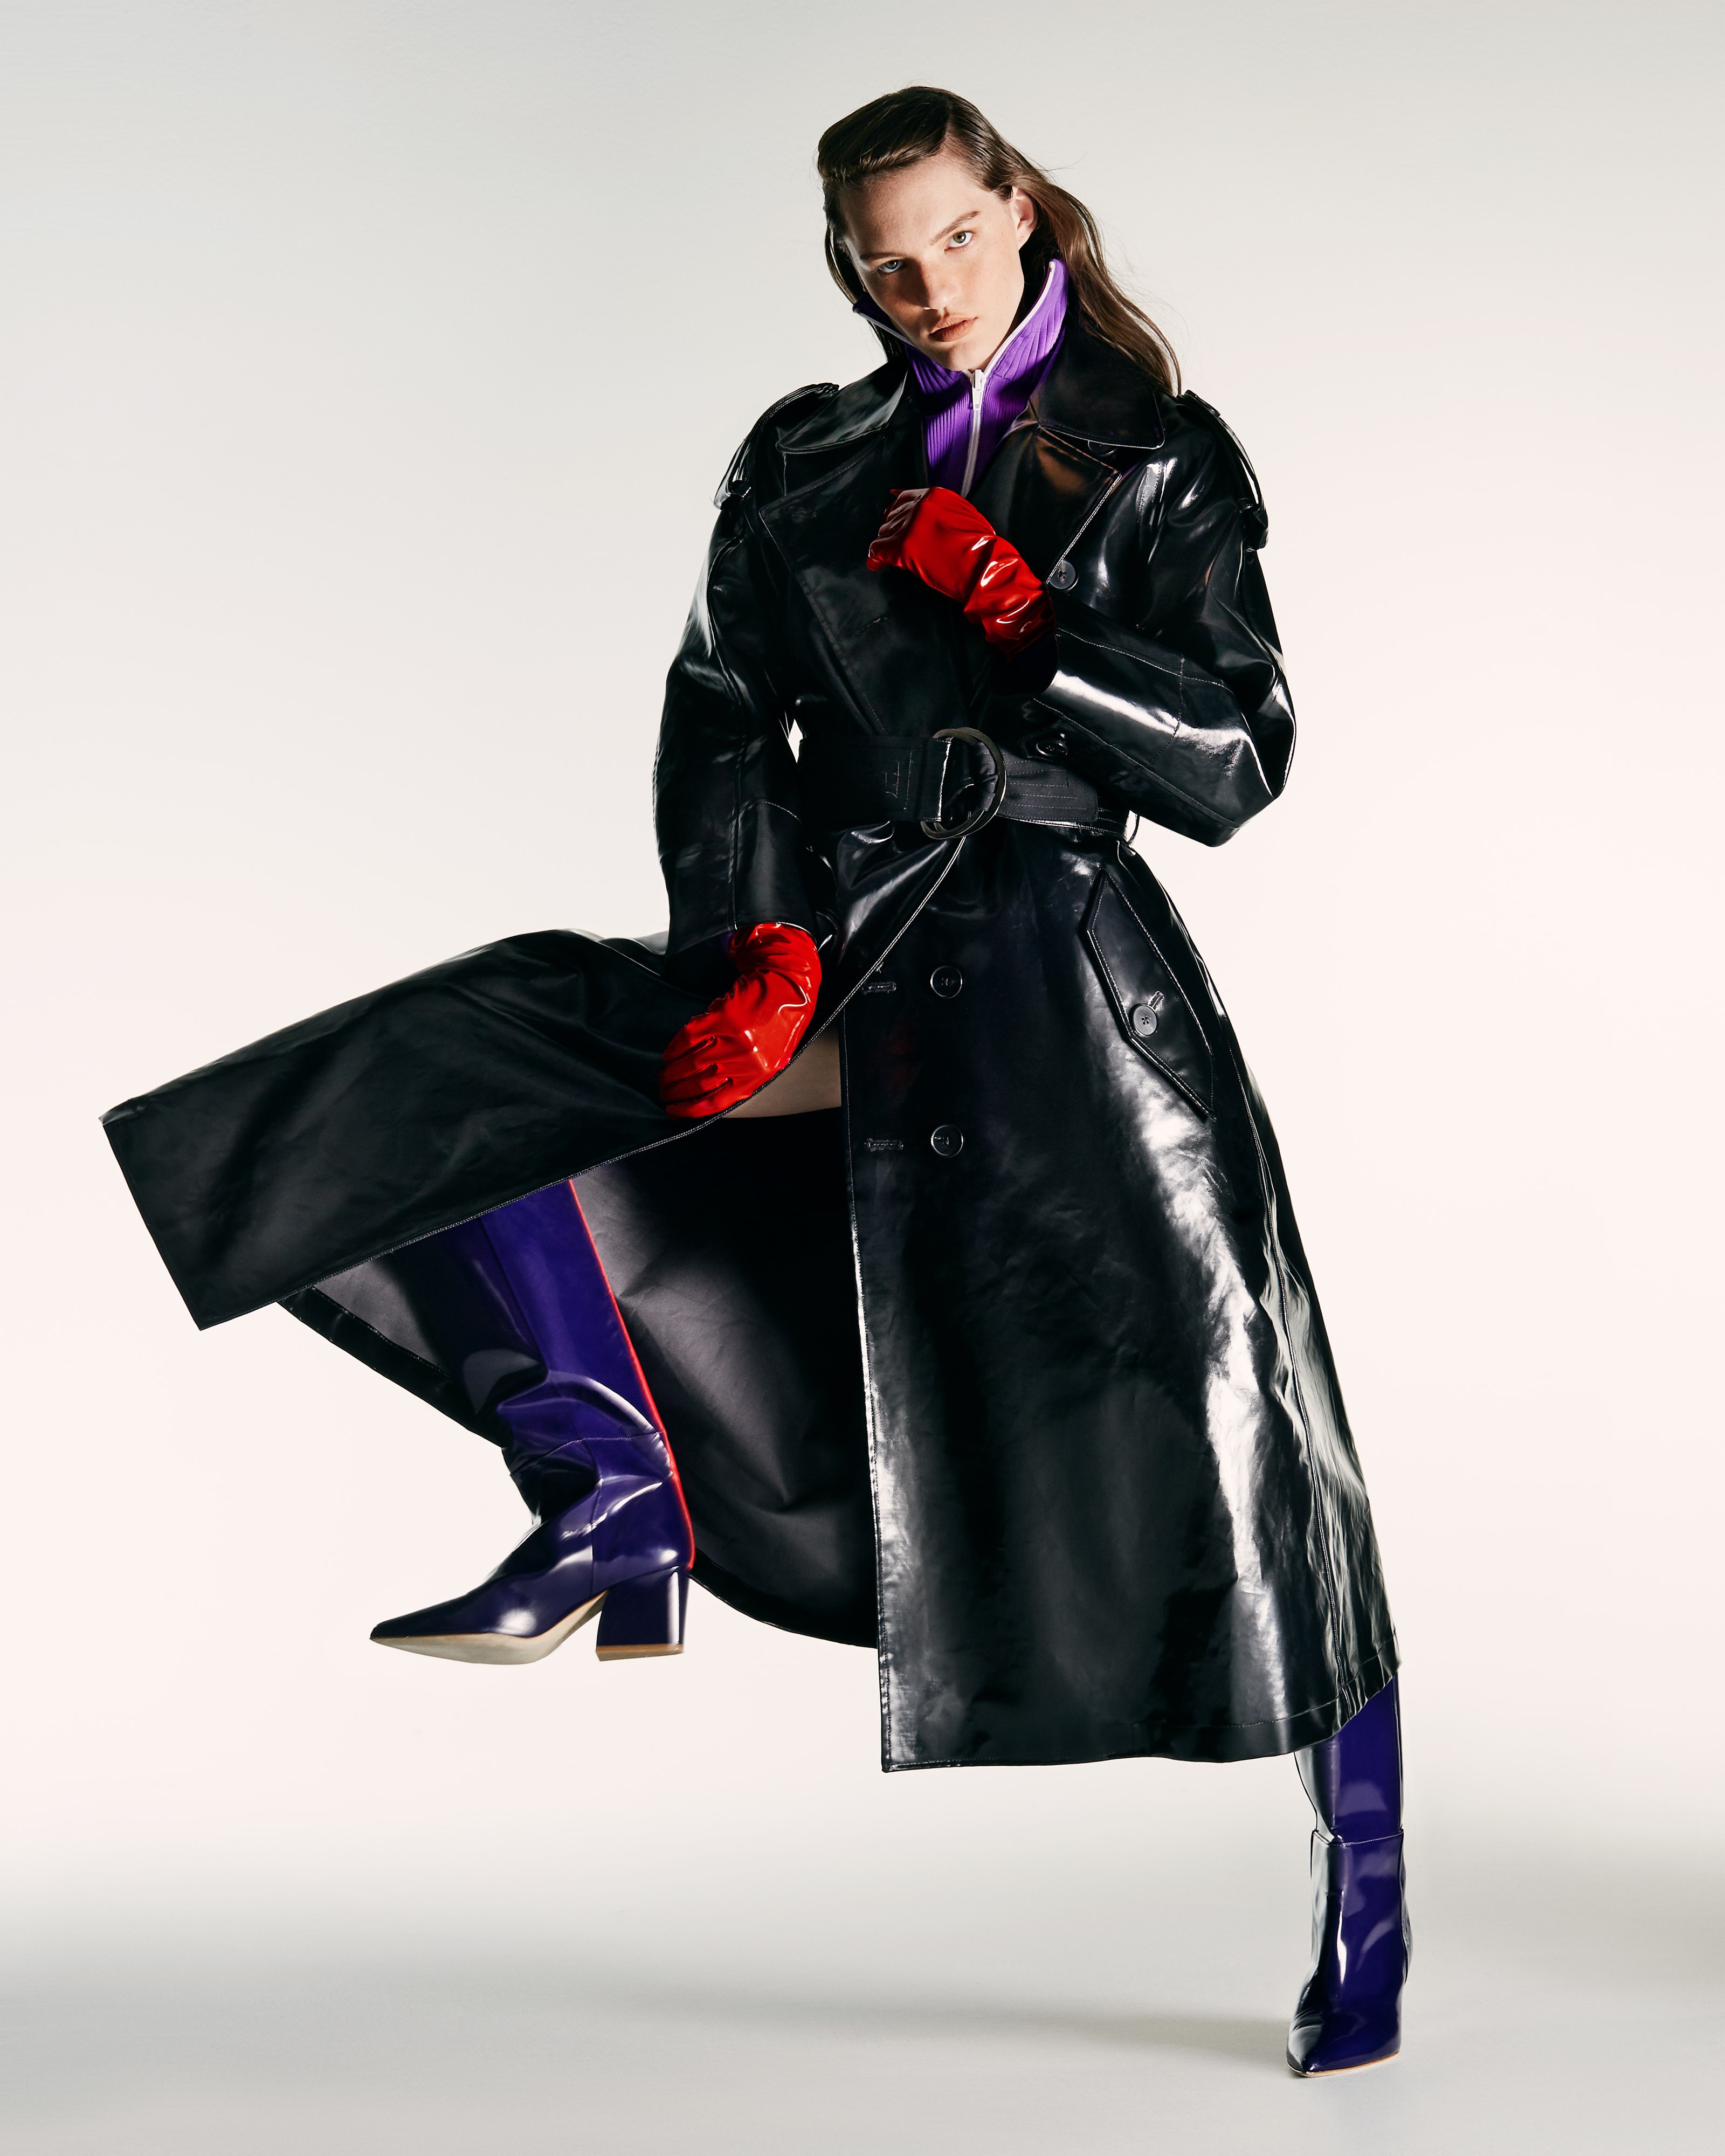 Slick finishes and sporty silhouettes elevate coats and jackets for autumn